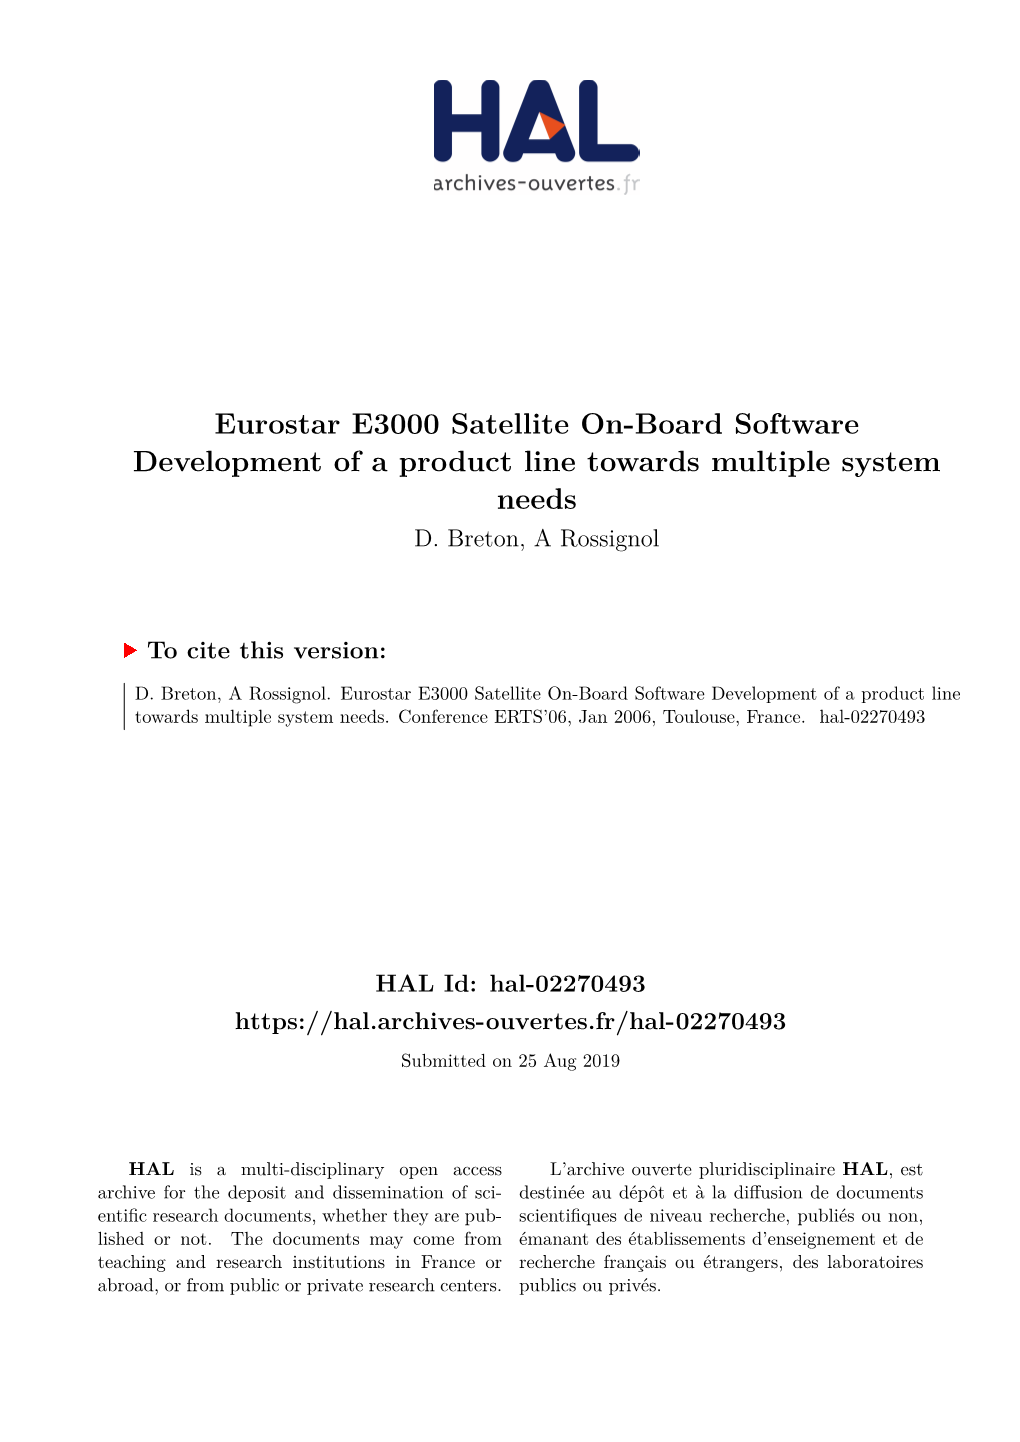 Eurostar E3000 Satellite On-Board Software Development of a Product Line Towards Multiple System Needs D